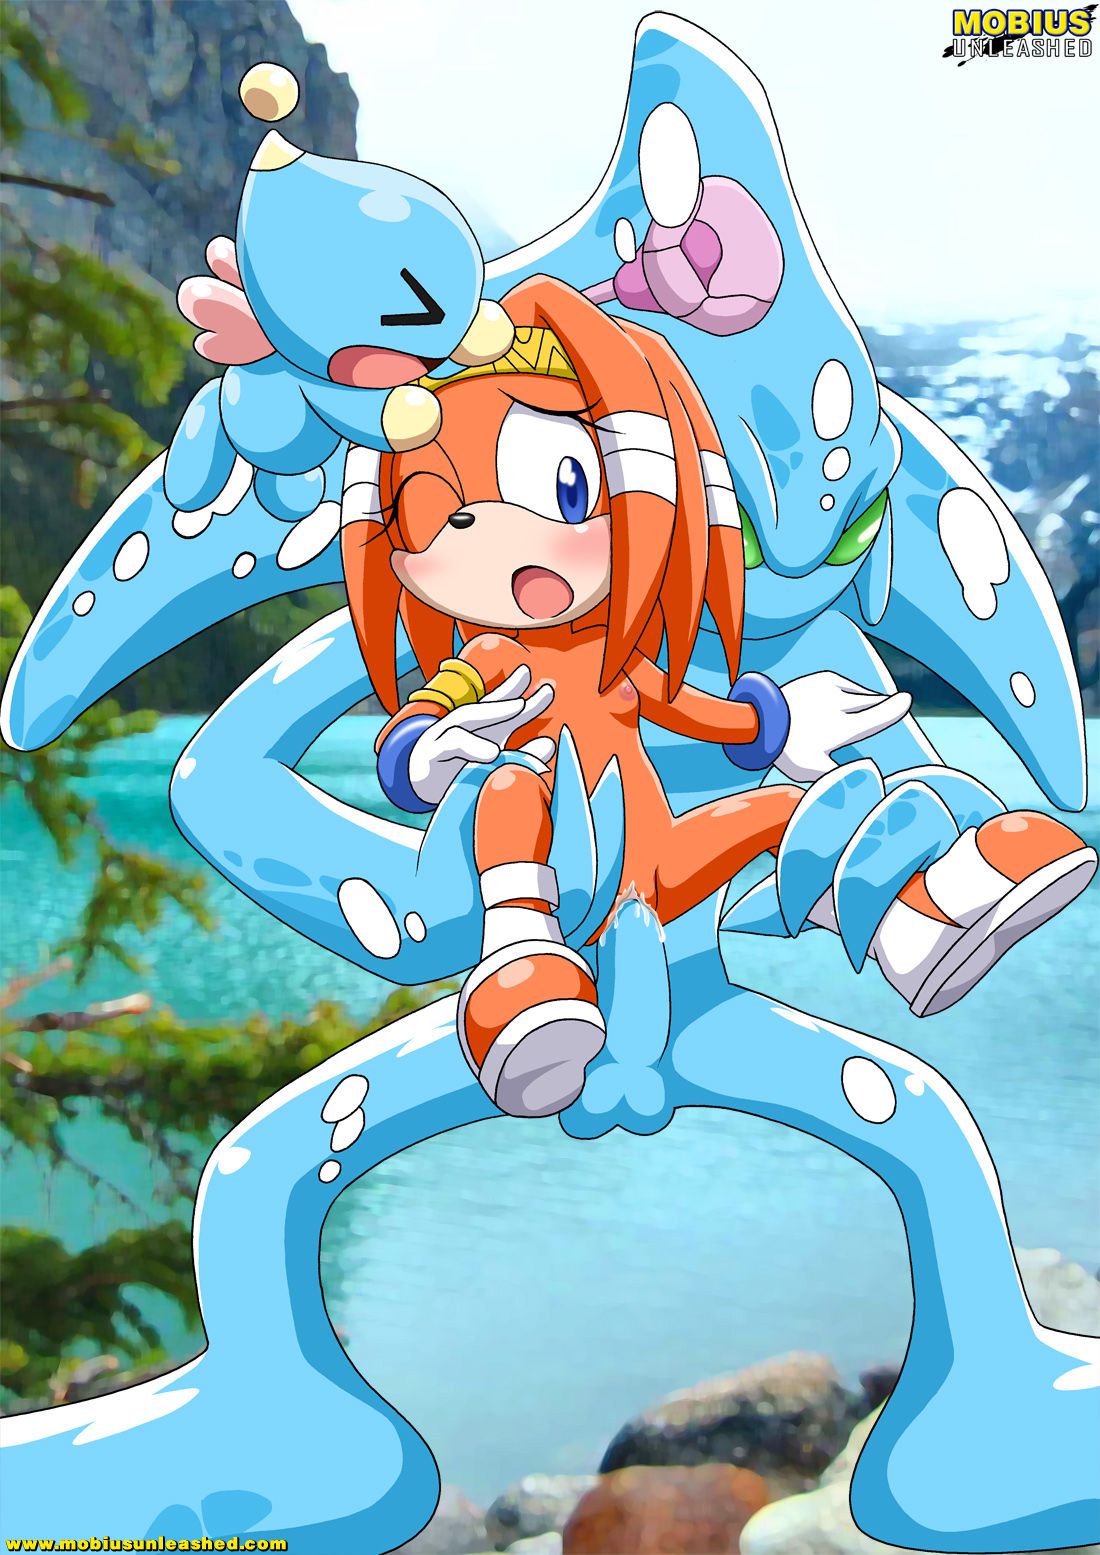 Mobius Unleashed: Tikal the Echidna 99